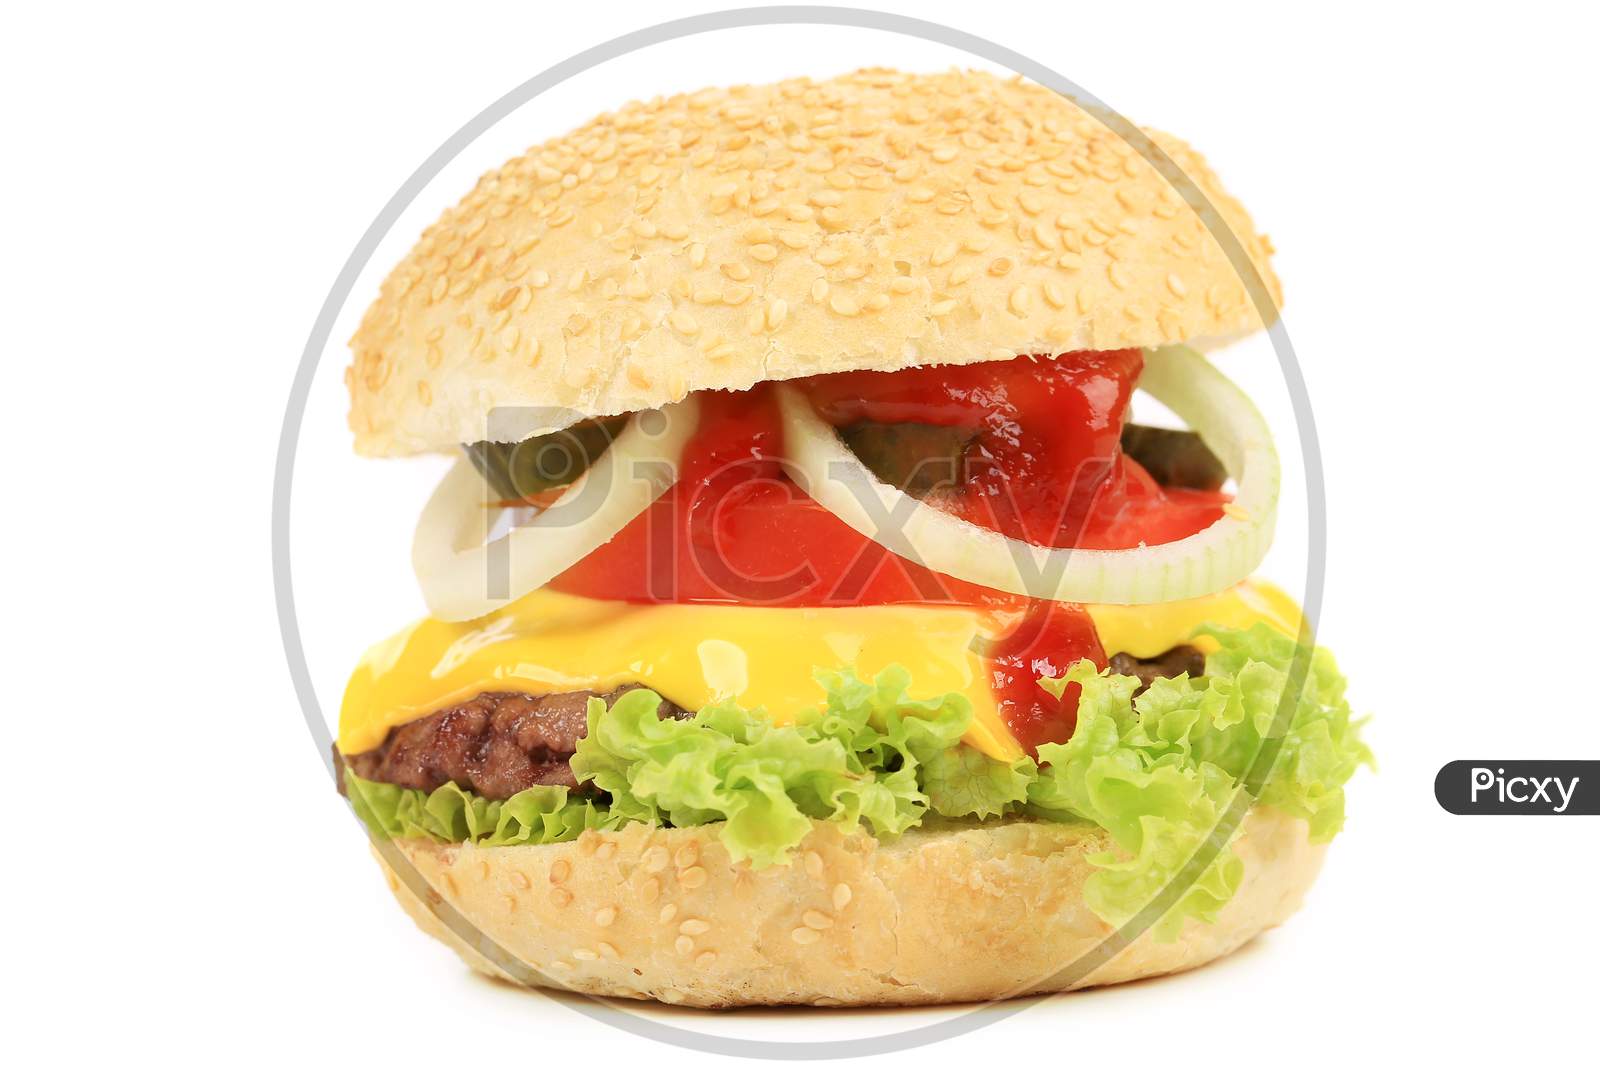 Appetizing Fast Food Hamburger. Isolated On A White Background.